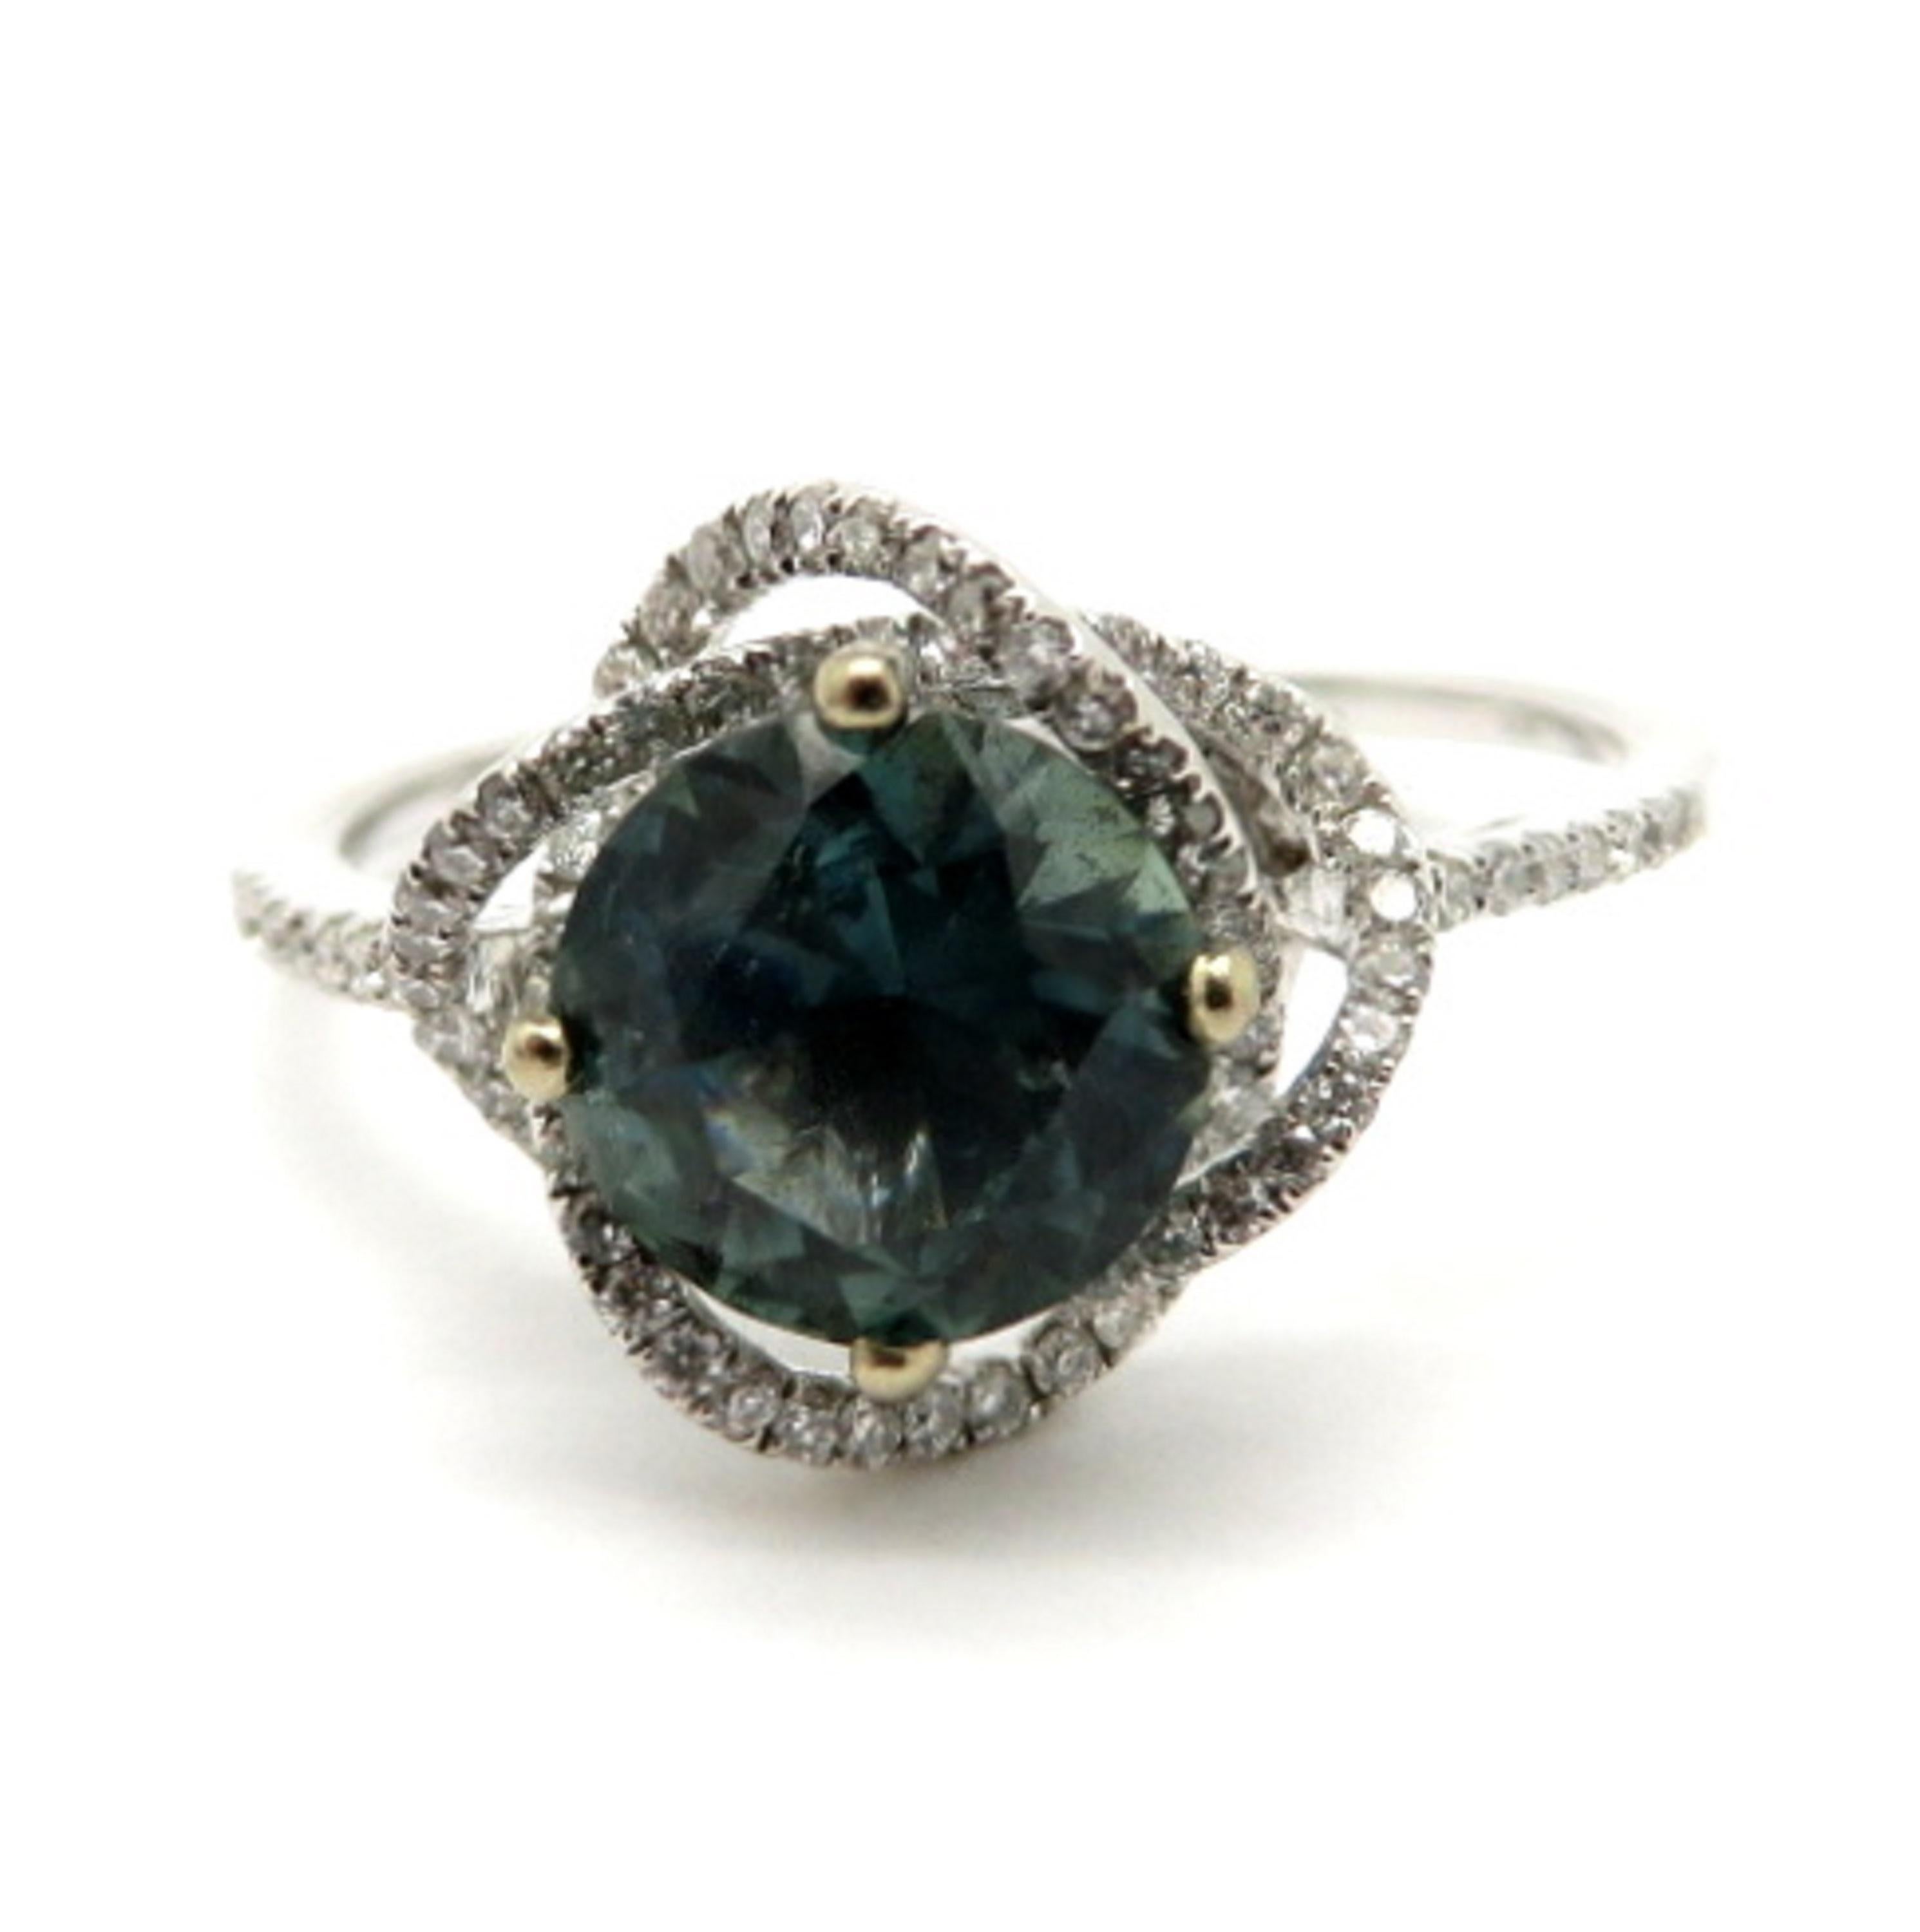 For sale is an 18K White Gold Sapphire and Diamond Ring in a floral setting!
Showcasing 1 Round Brilliant Cut fine quality bluish Green sapphire, weighing 1.51 carats.
Interspersed through the floral setting are 84 Round Brilliant Cut diamonds,